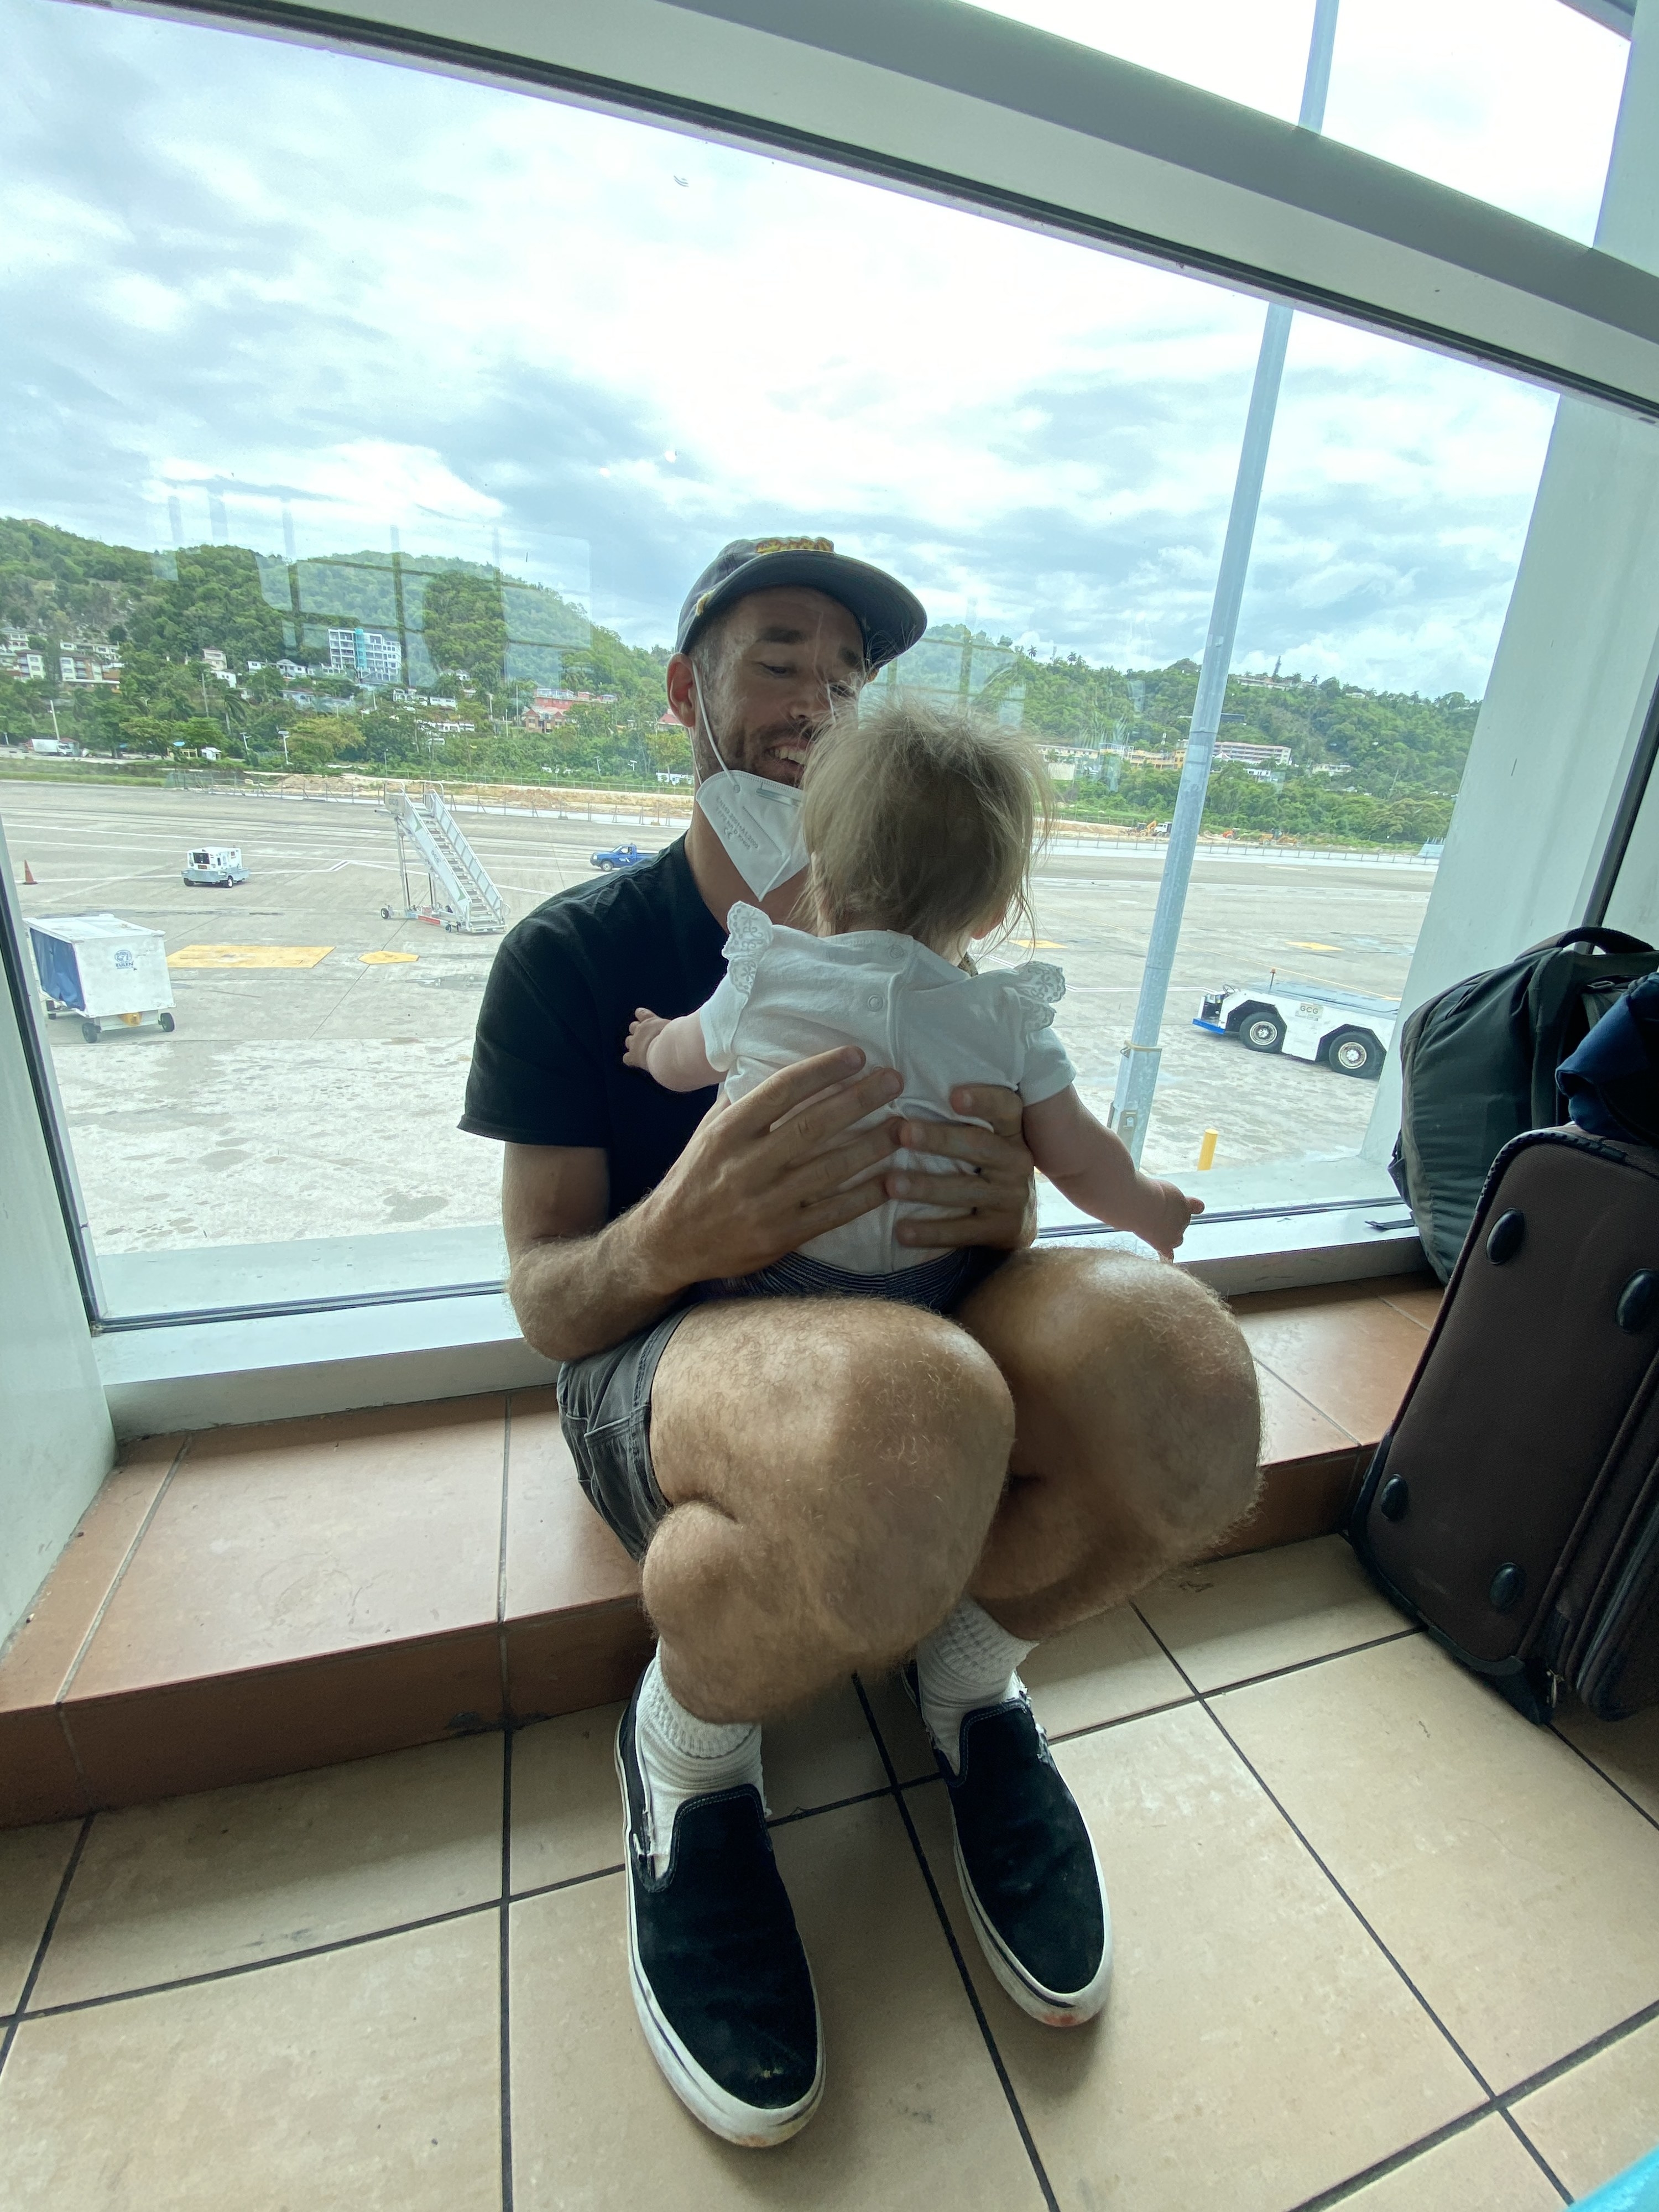 Man with baby in an airport near the windows